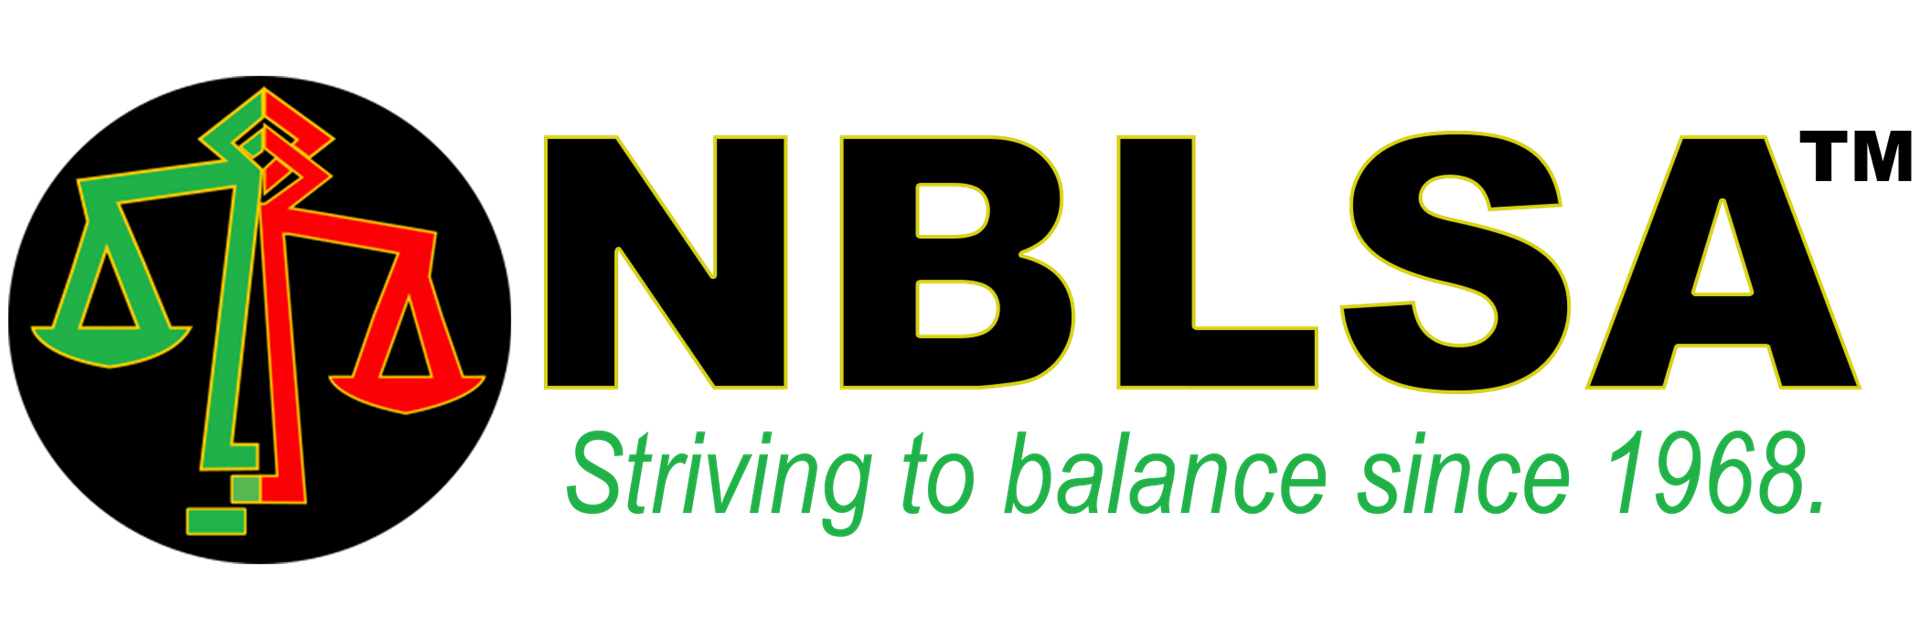 NBLSA logo with green text that reads "Striving to balance since 1968."